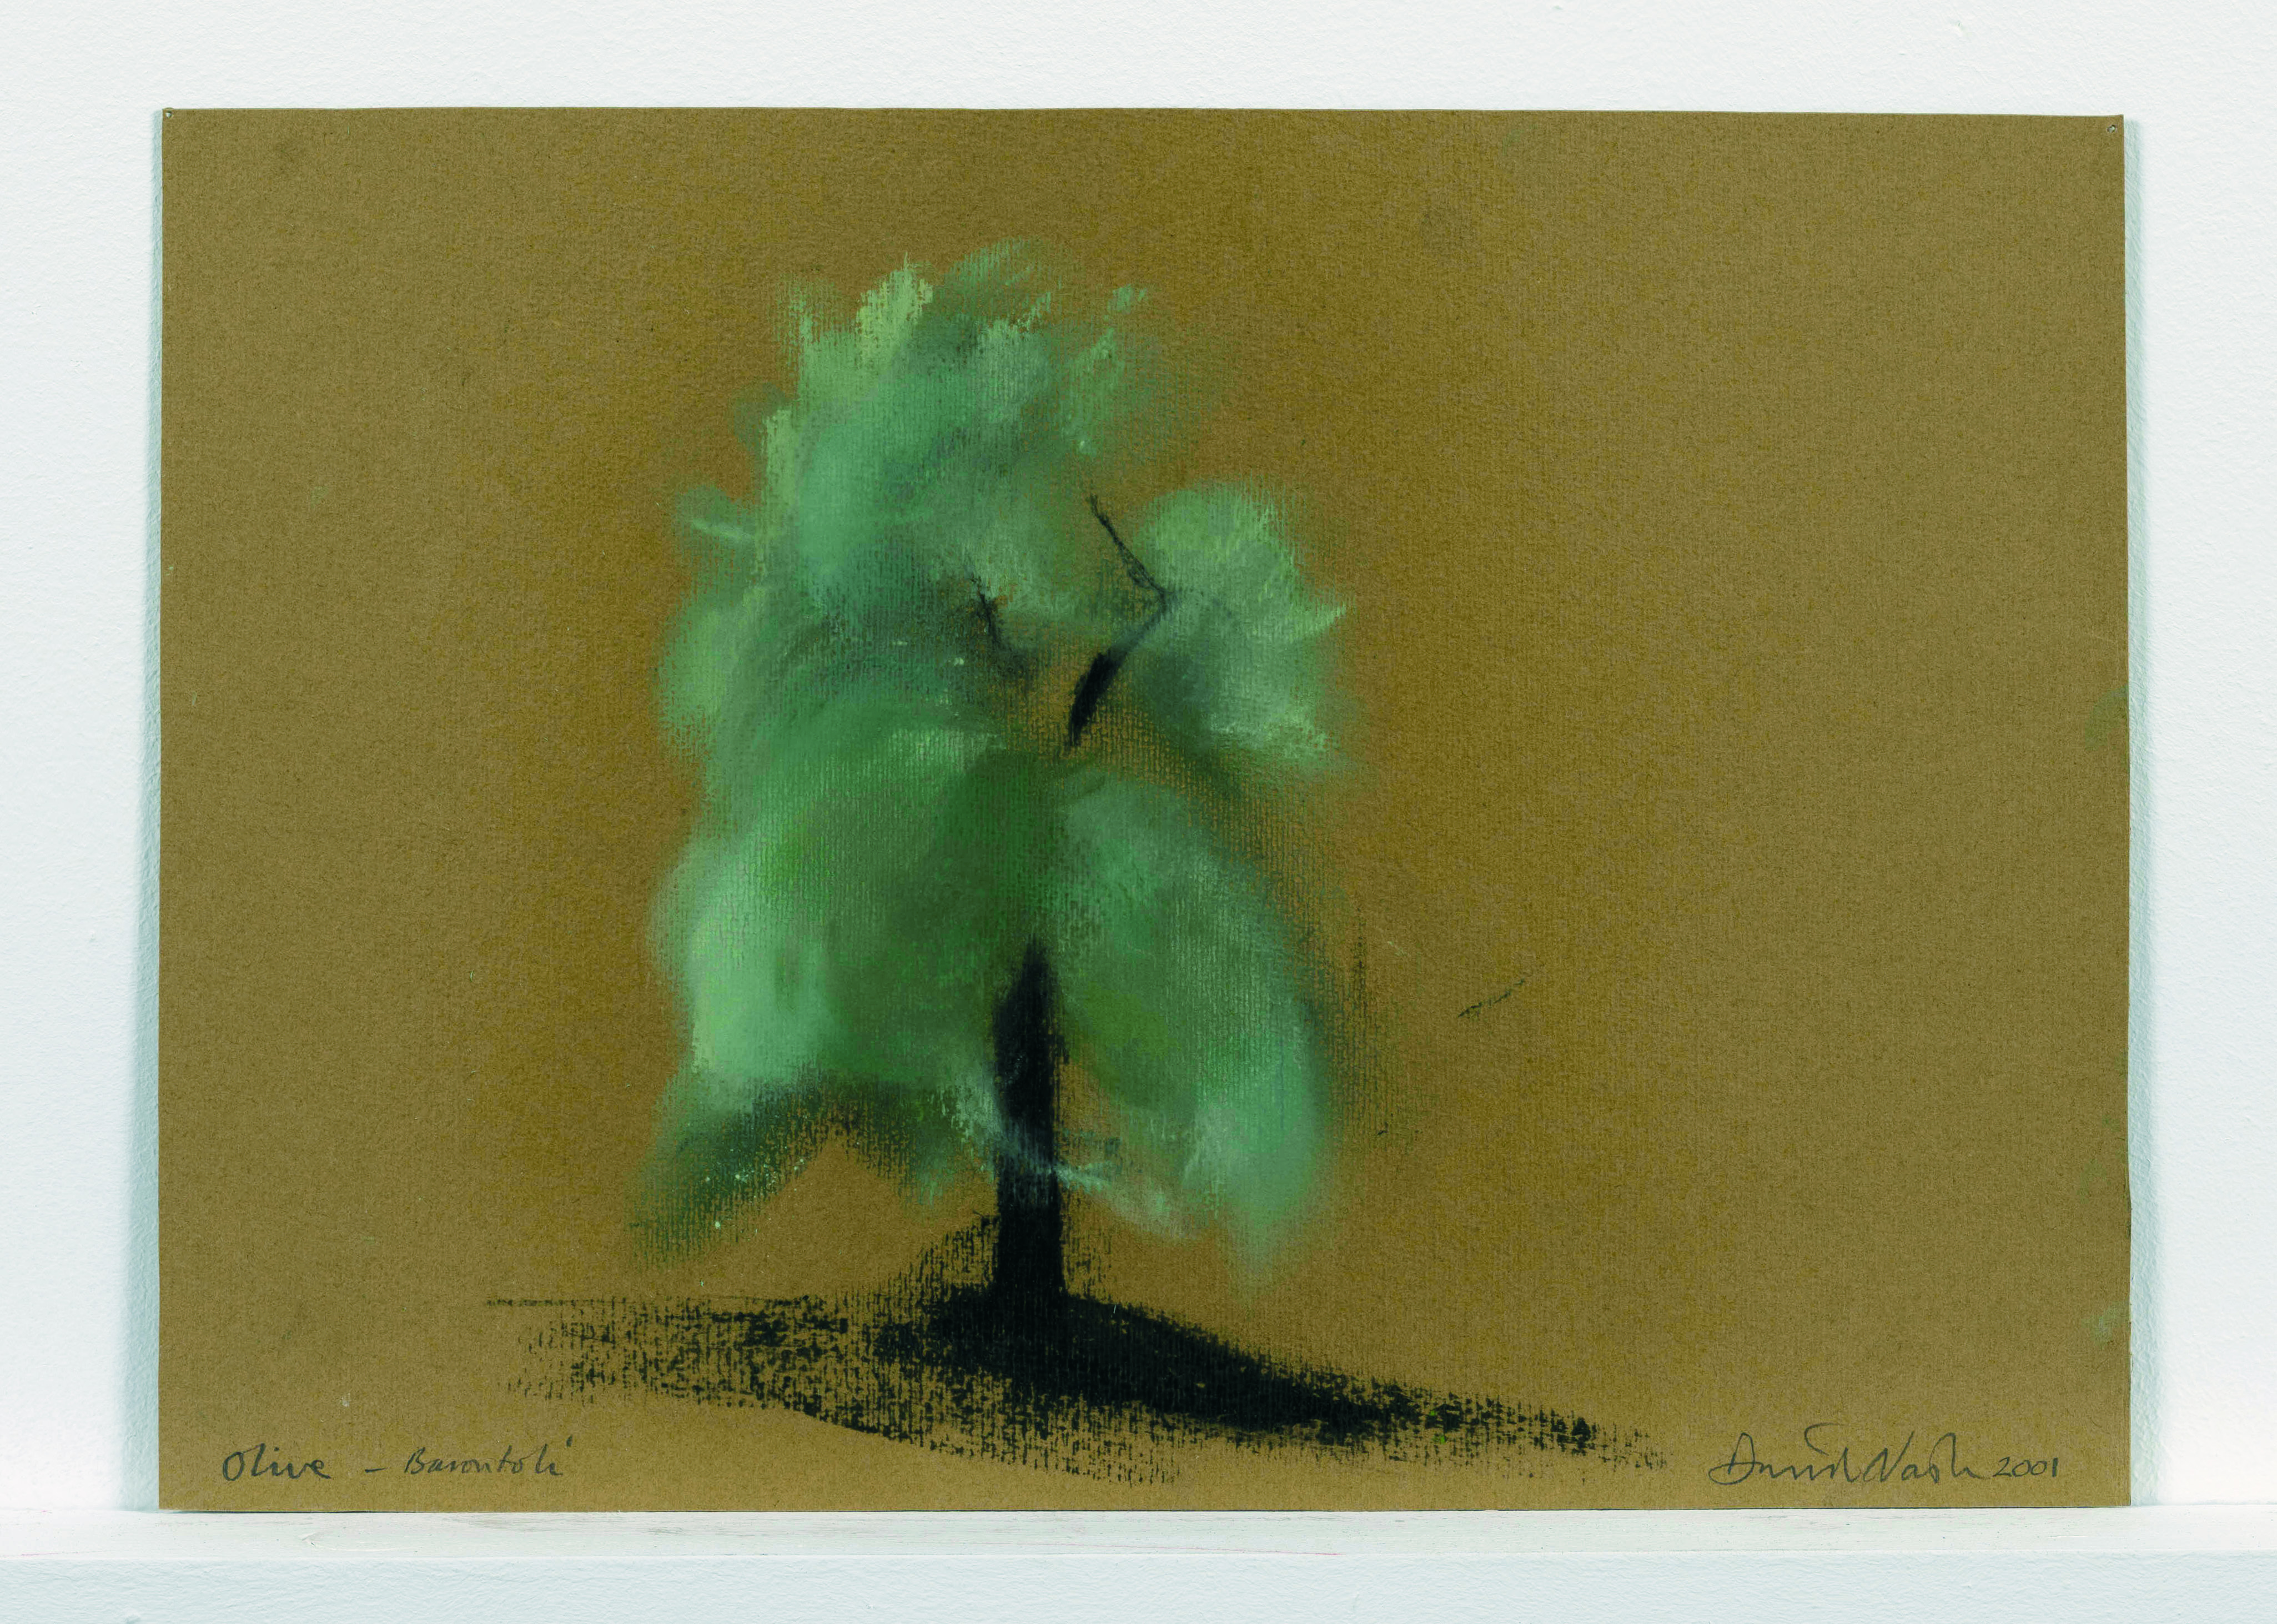 Pastel drawing of a green tree on paper.